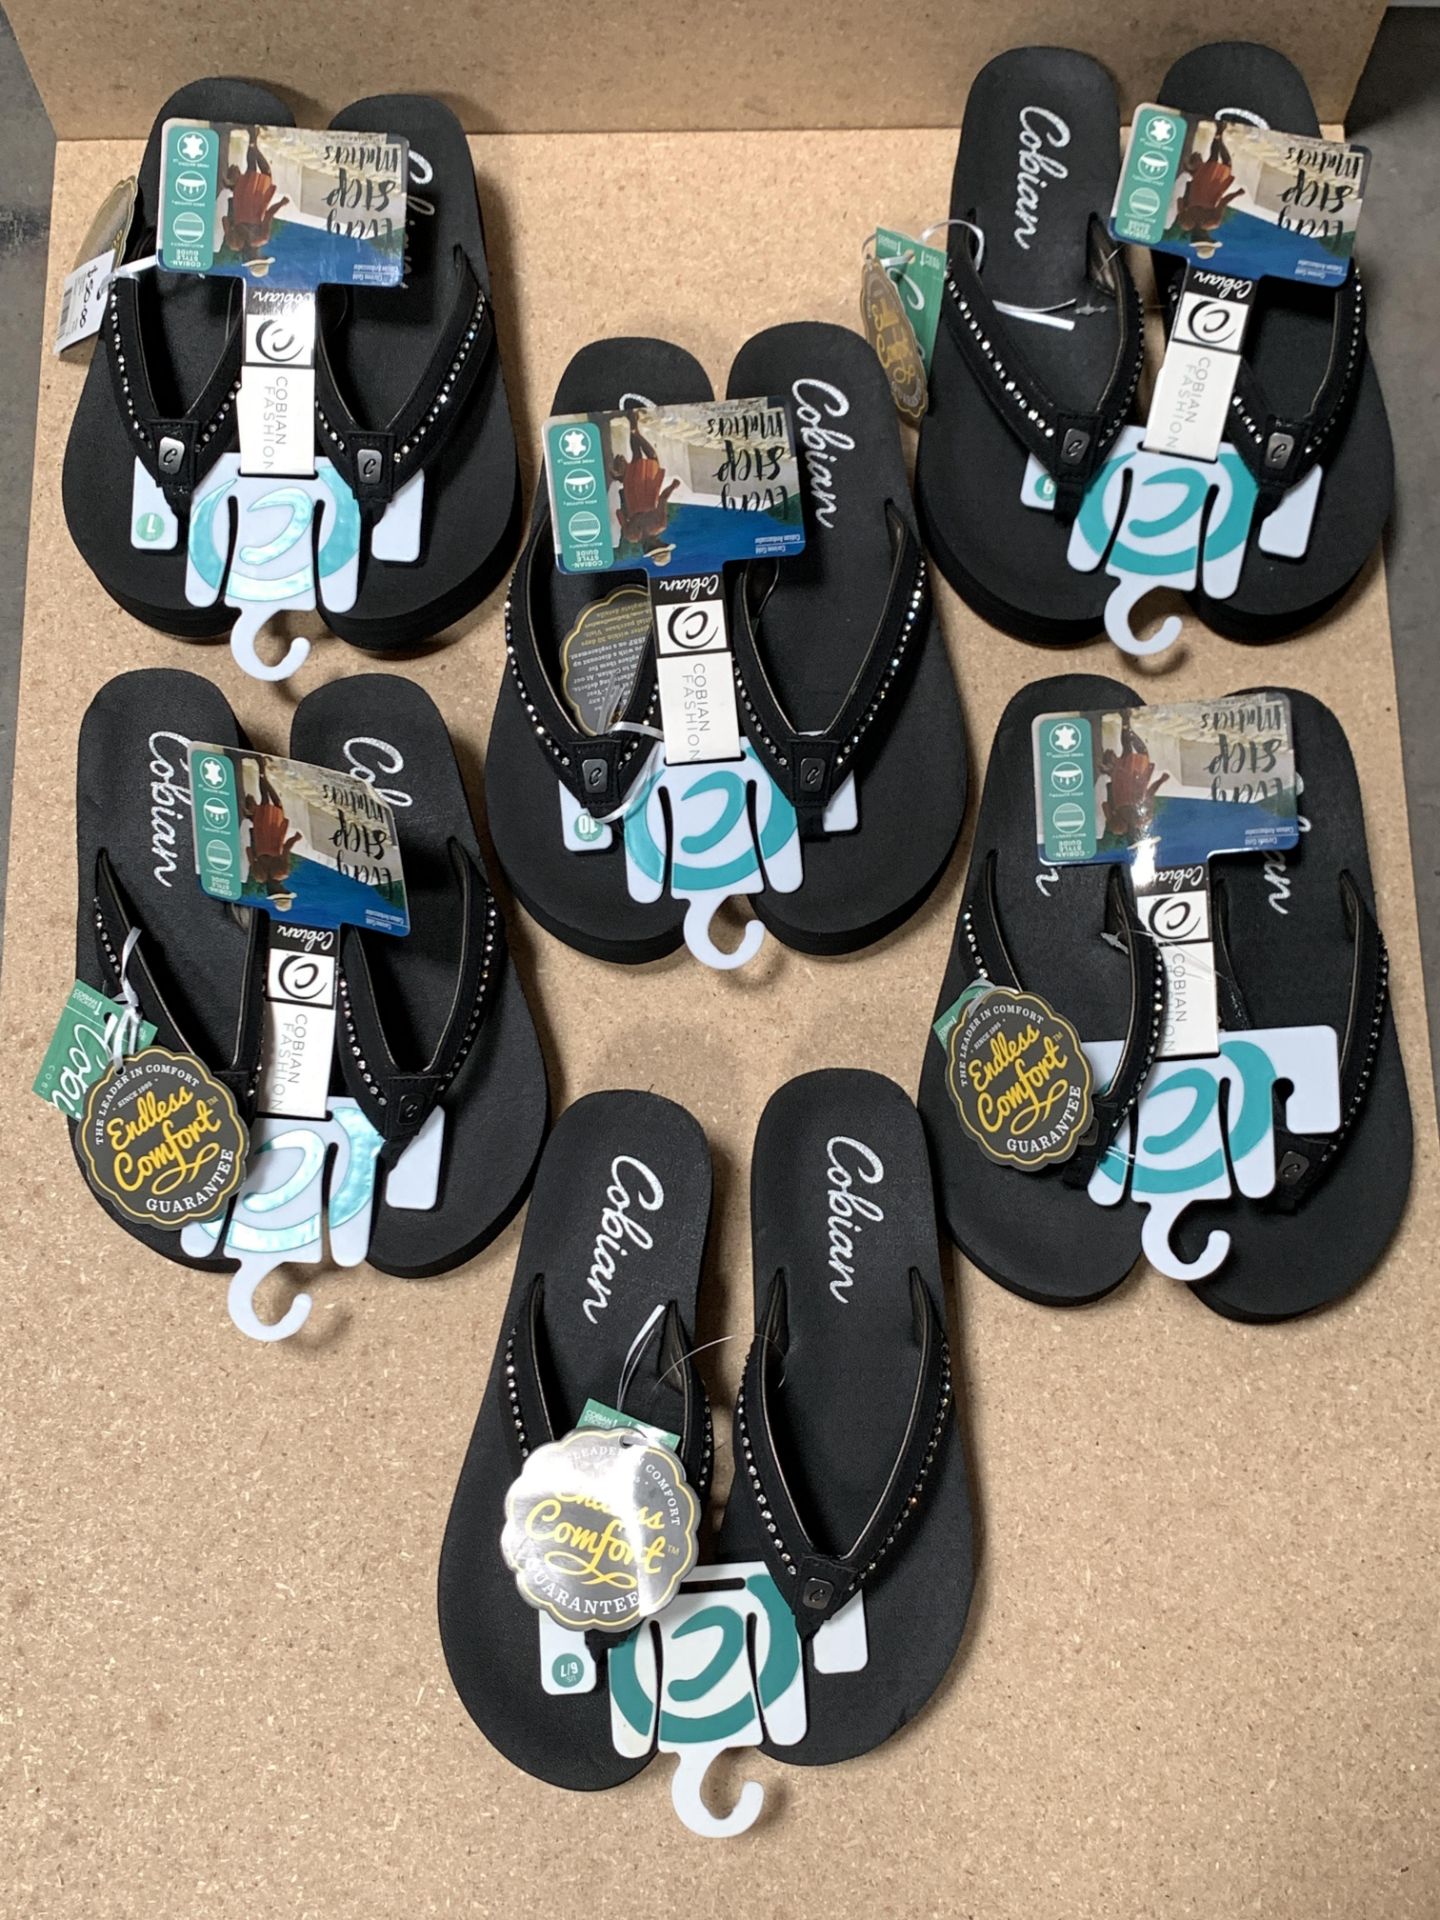 6 Pairs Cobian Flip Flop Sandals, Tiffany w. Crystals, New w. Tags, Various Sizes (Retail $300)